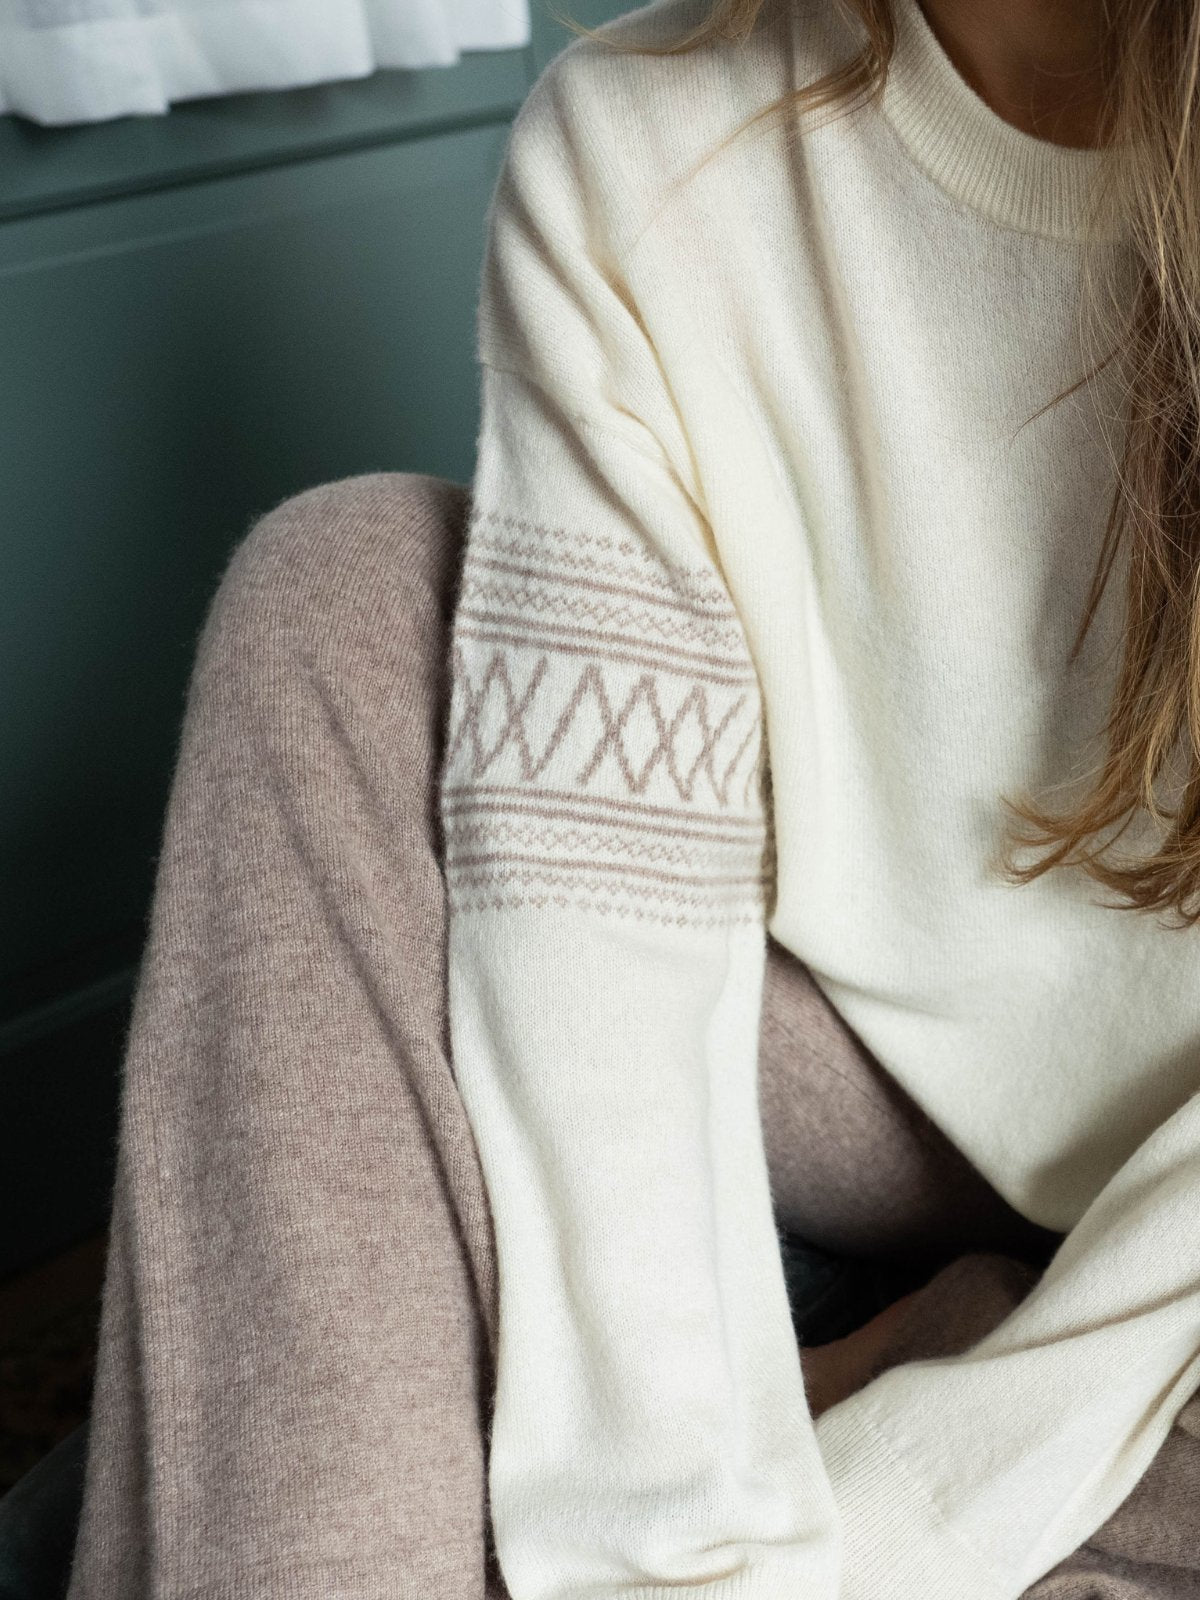 Cashmere outfit detail